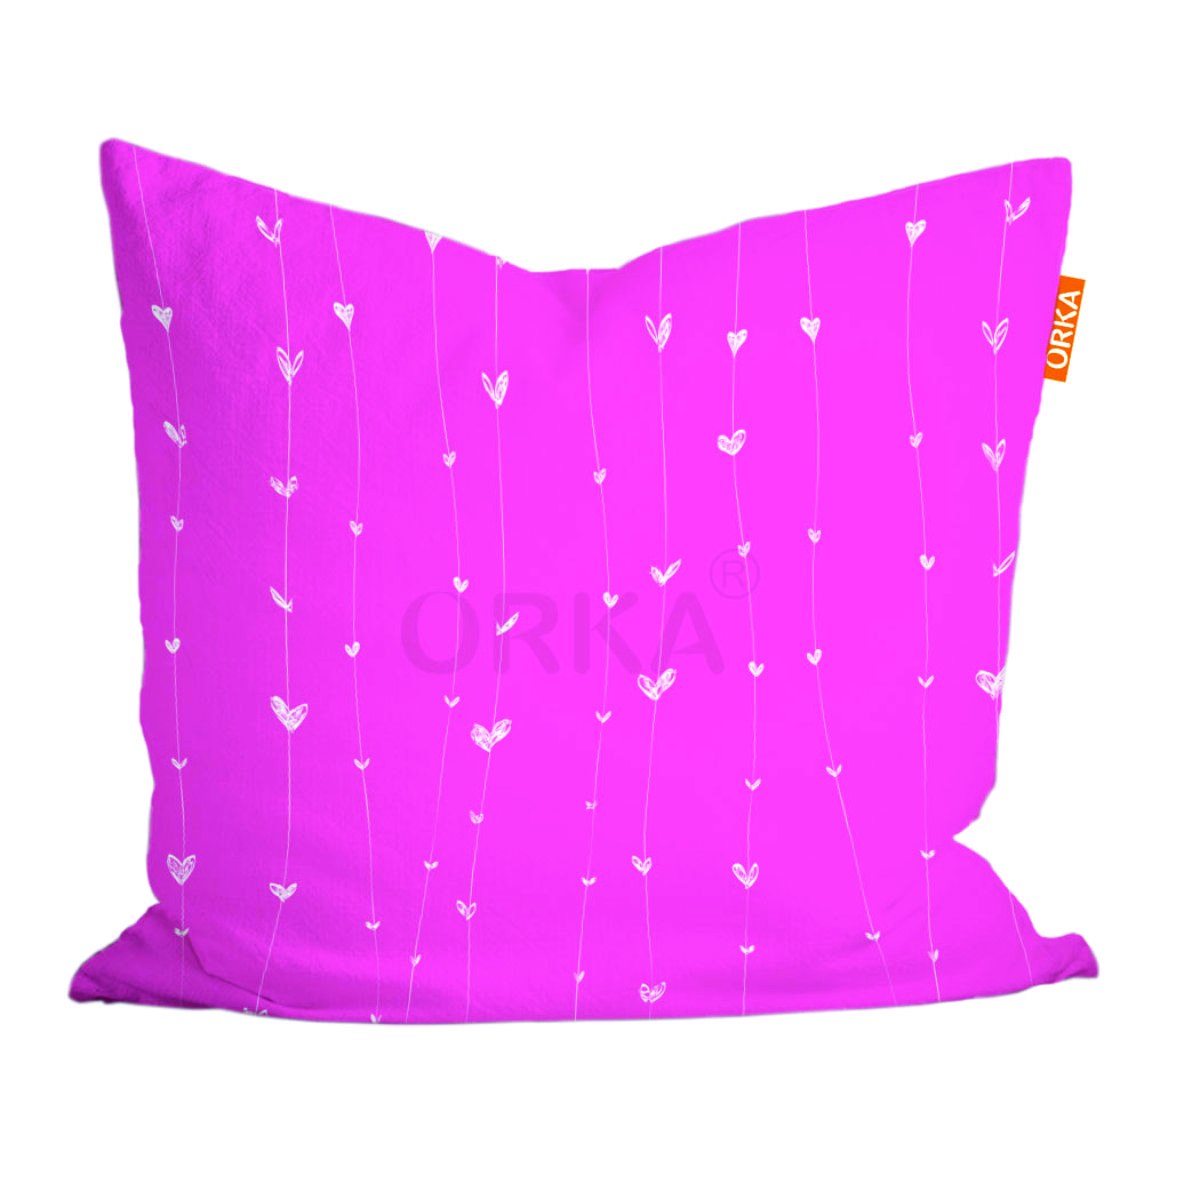 ORKA Valentine Theme Digital Printed Cushion - Pink 14"x14" Cover Only